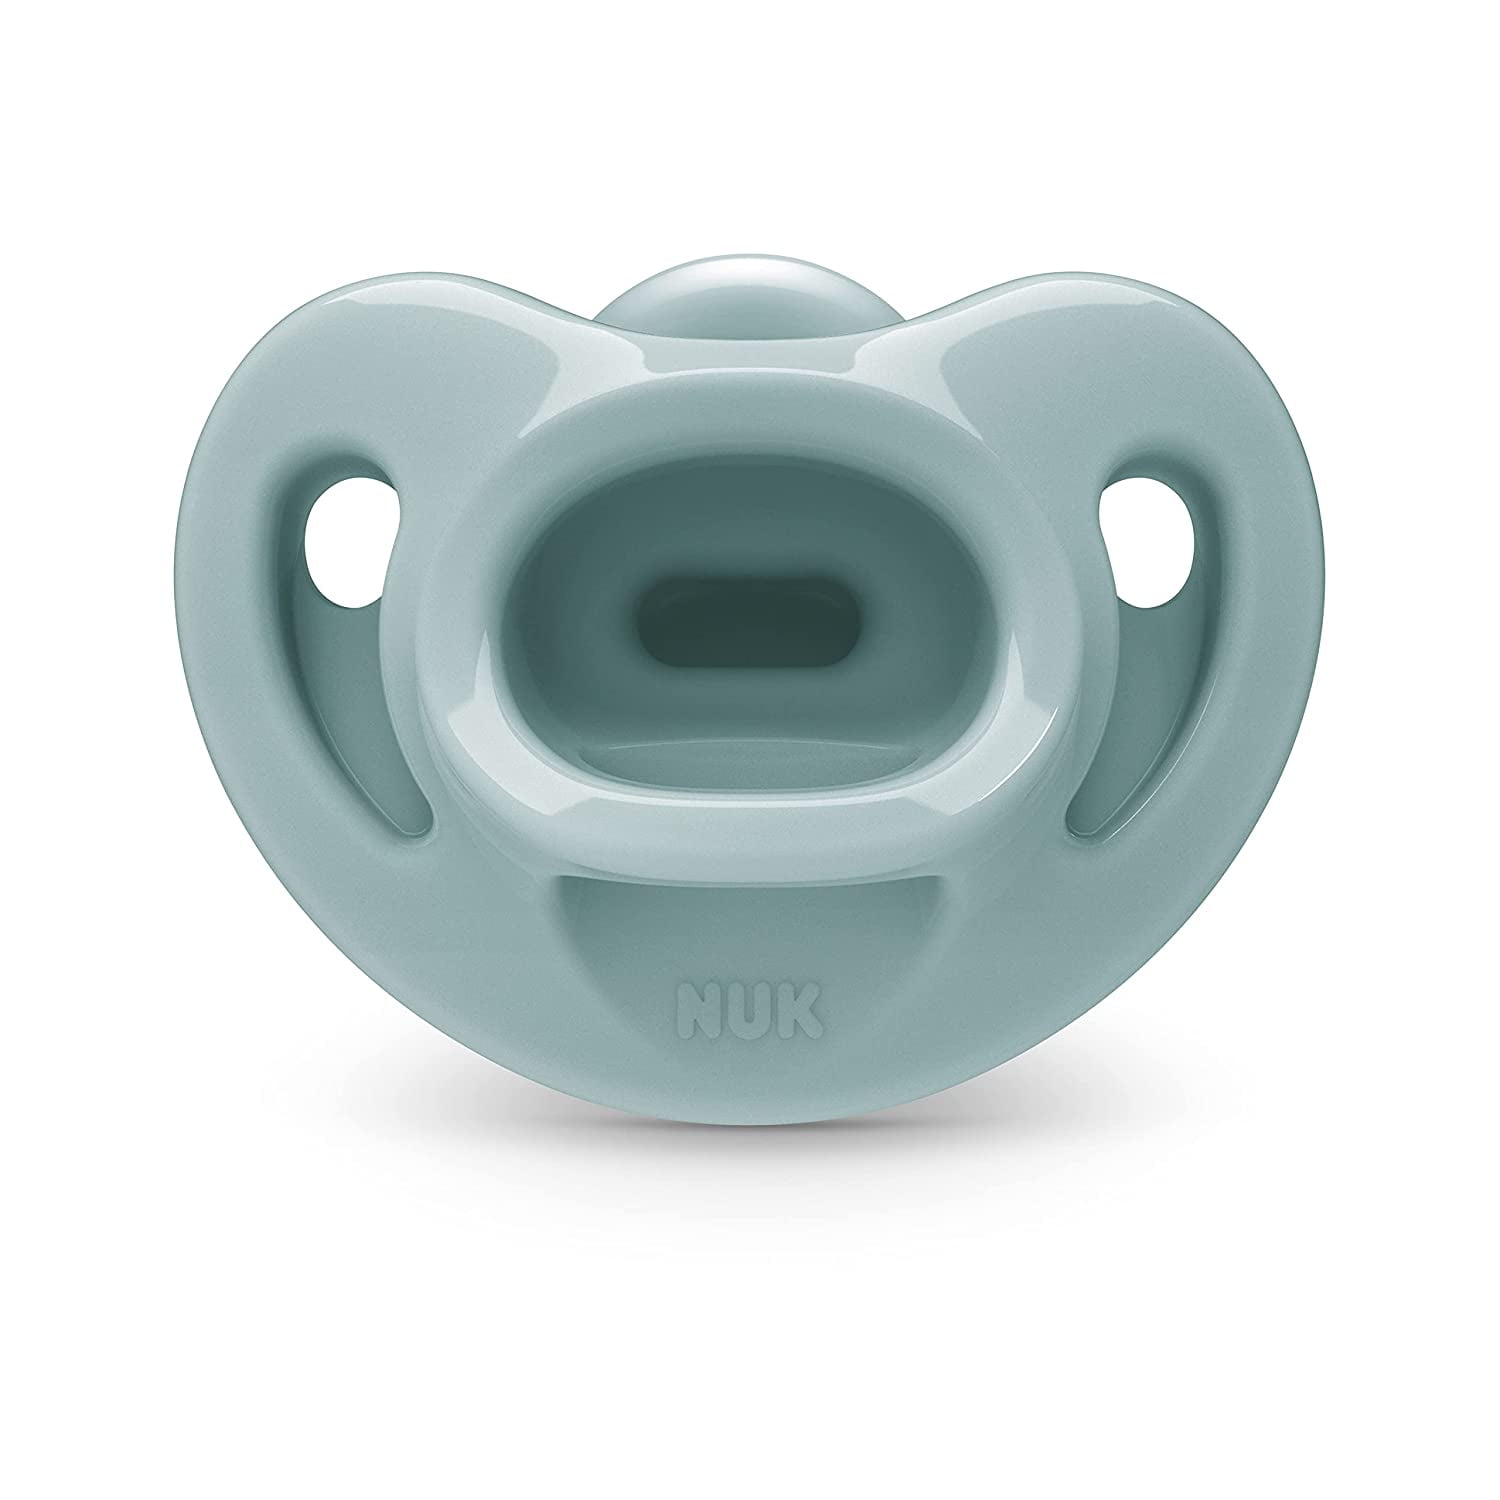 NUK ORTHODONTIC PACIFIER 0-6 months BRAND NEW bnib CROWNS silicone BP FREE  blue